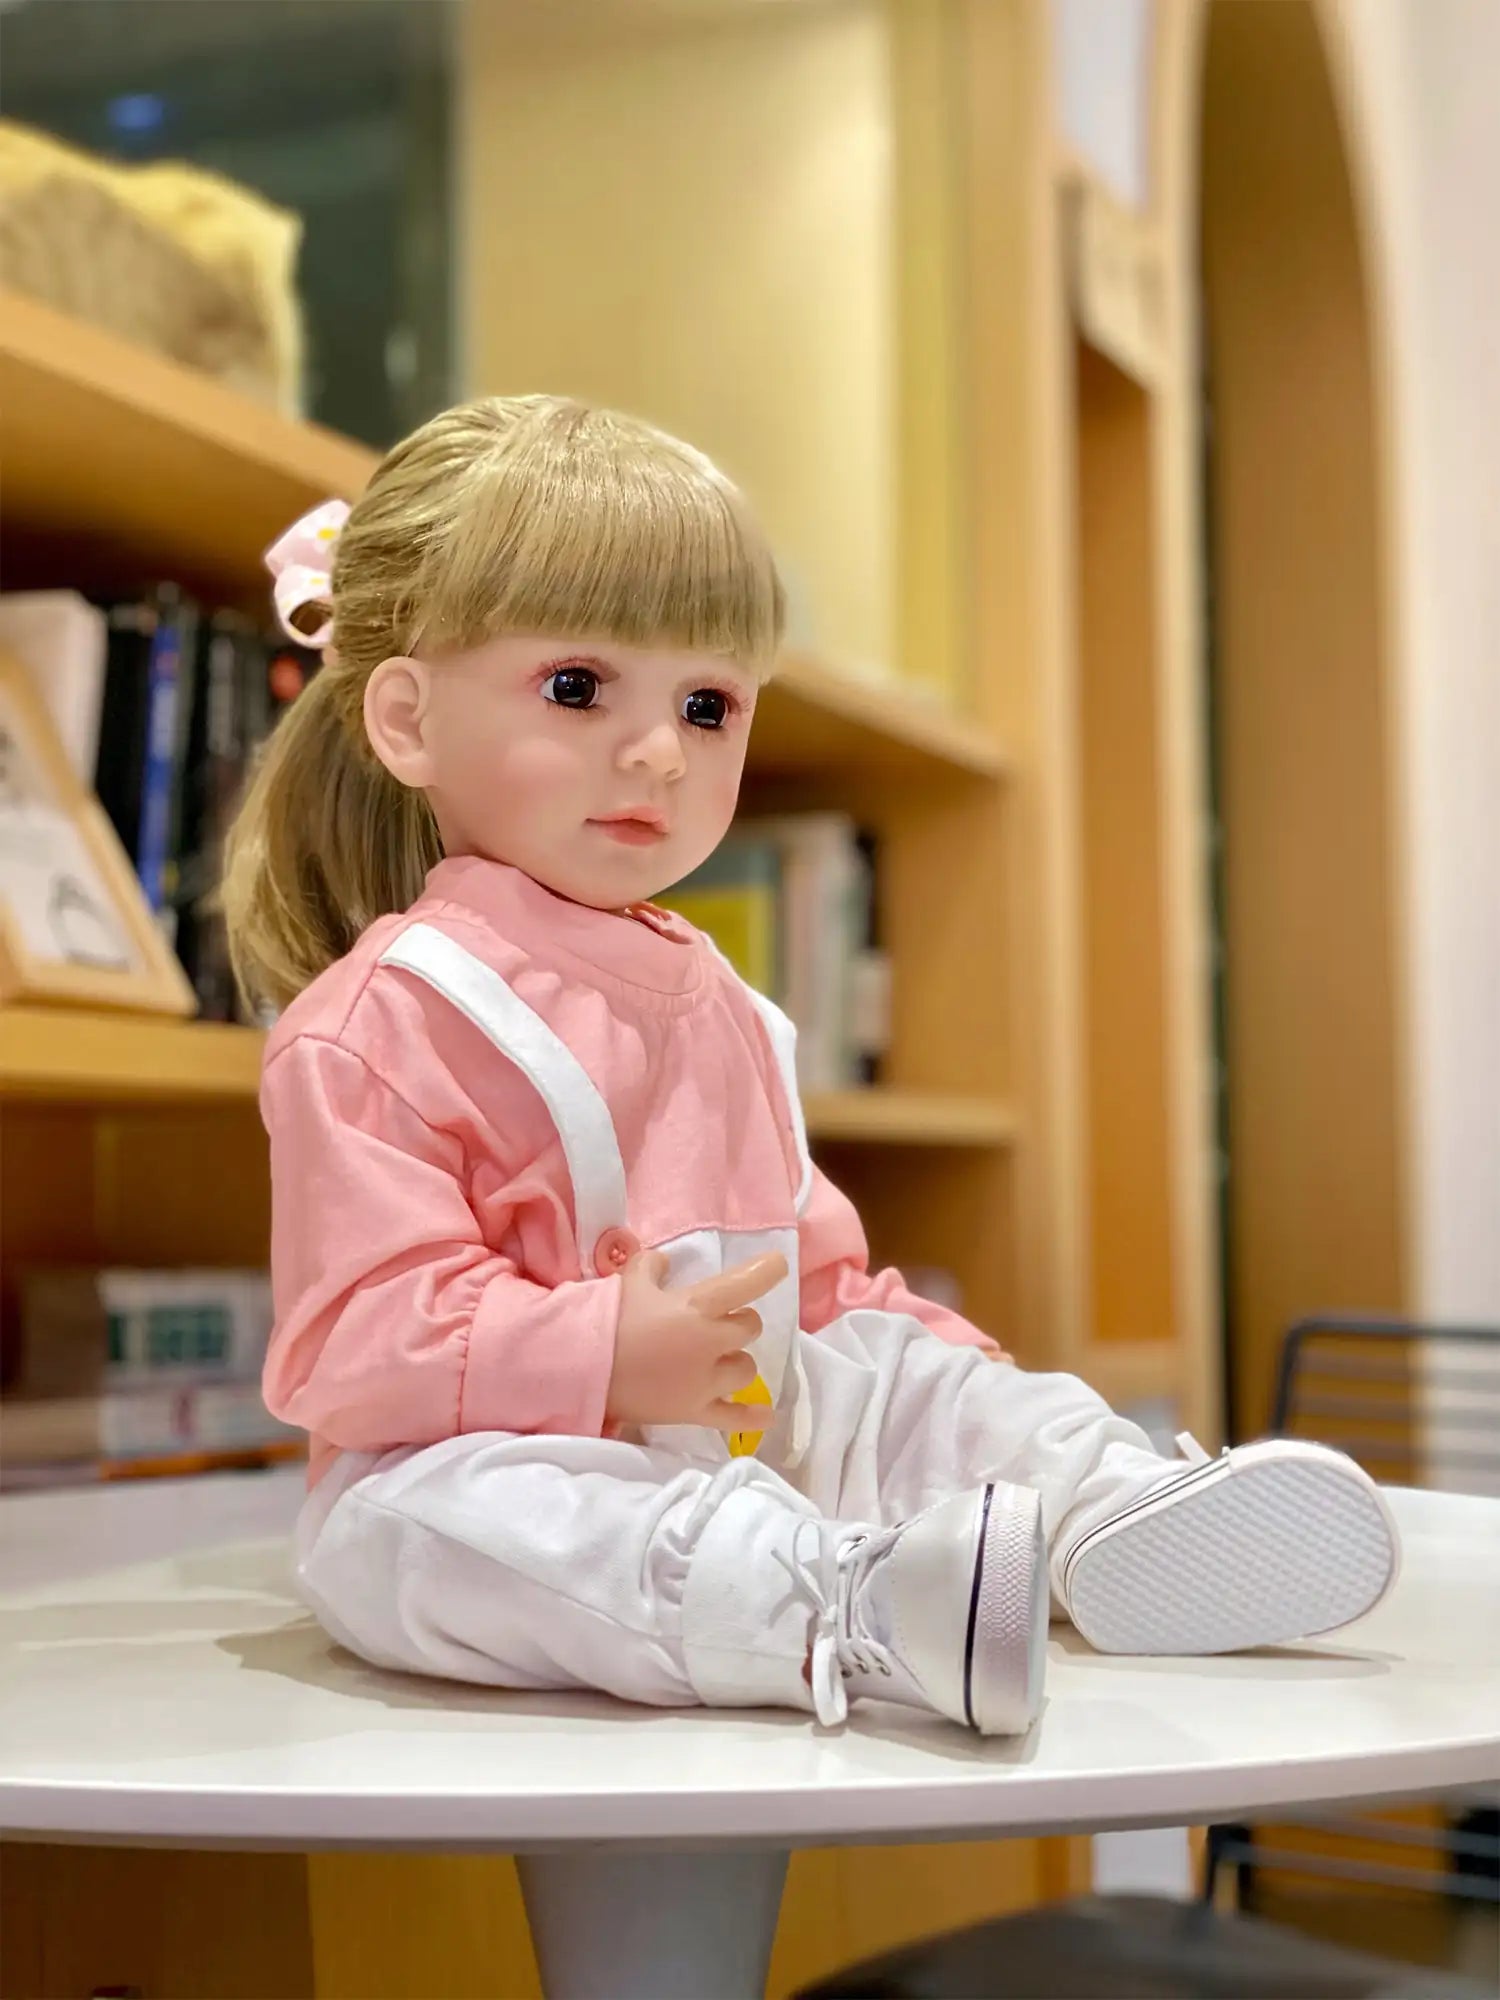 Toddler doll with blonde hair, seated on the floor in a pink sweatshirt and white pants, holding a yellow object, with a toy car in the background.